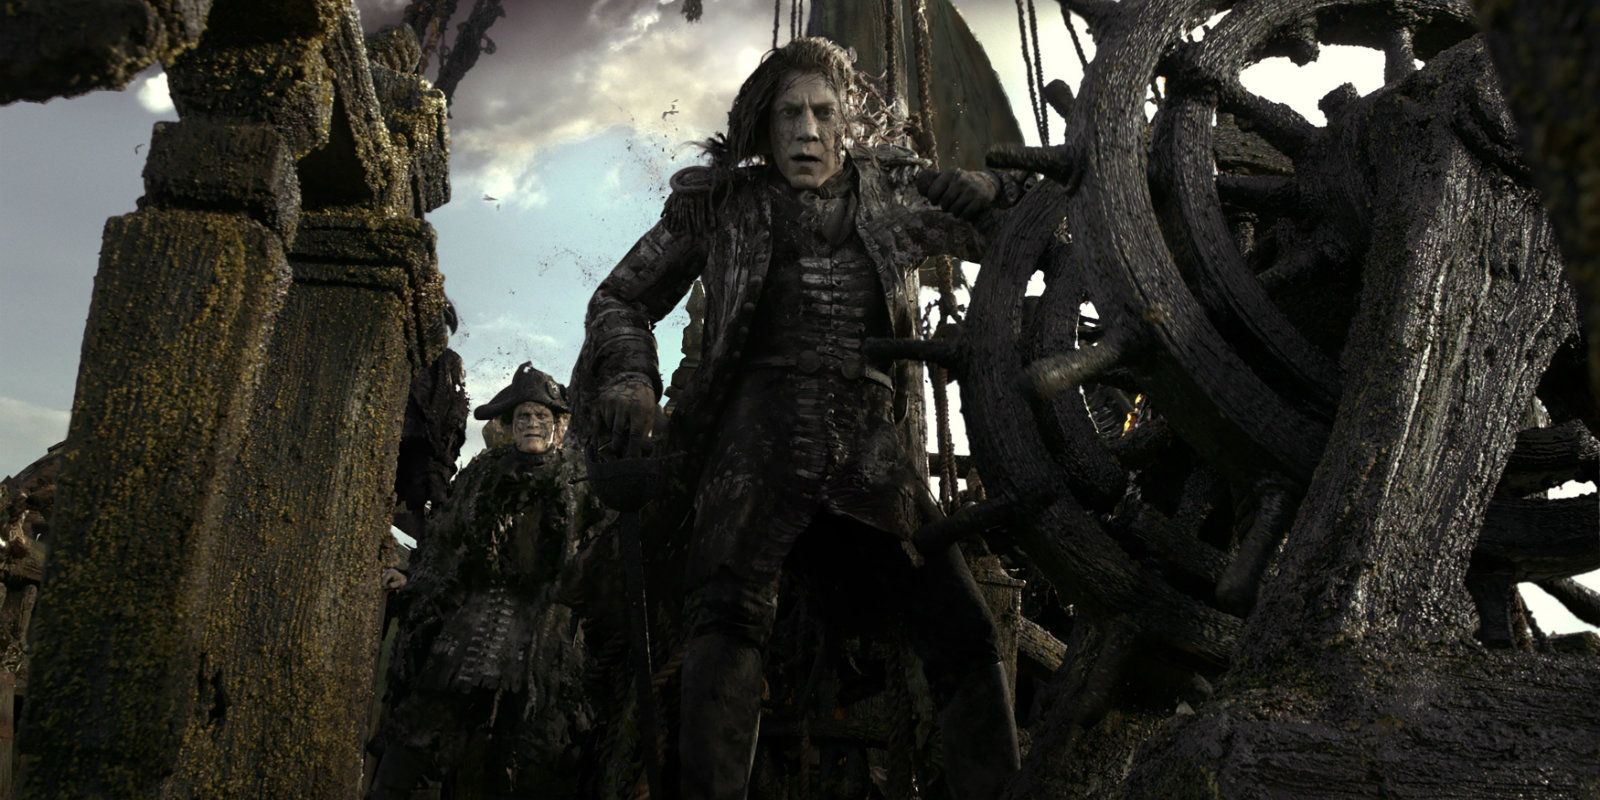 Pirates of the Caribbean: Dead Men Tell No Tales - Javier Bardem as Salazar